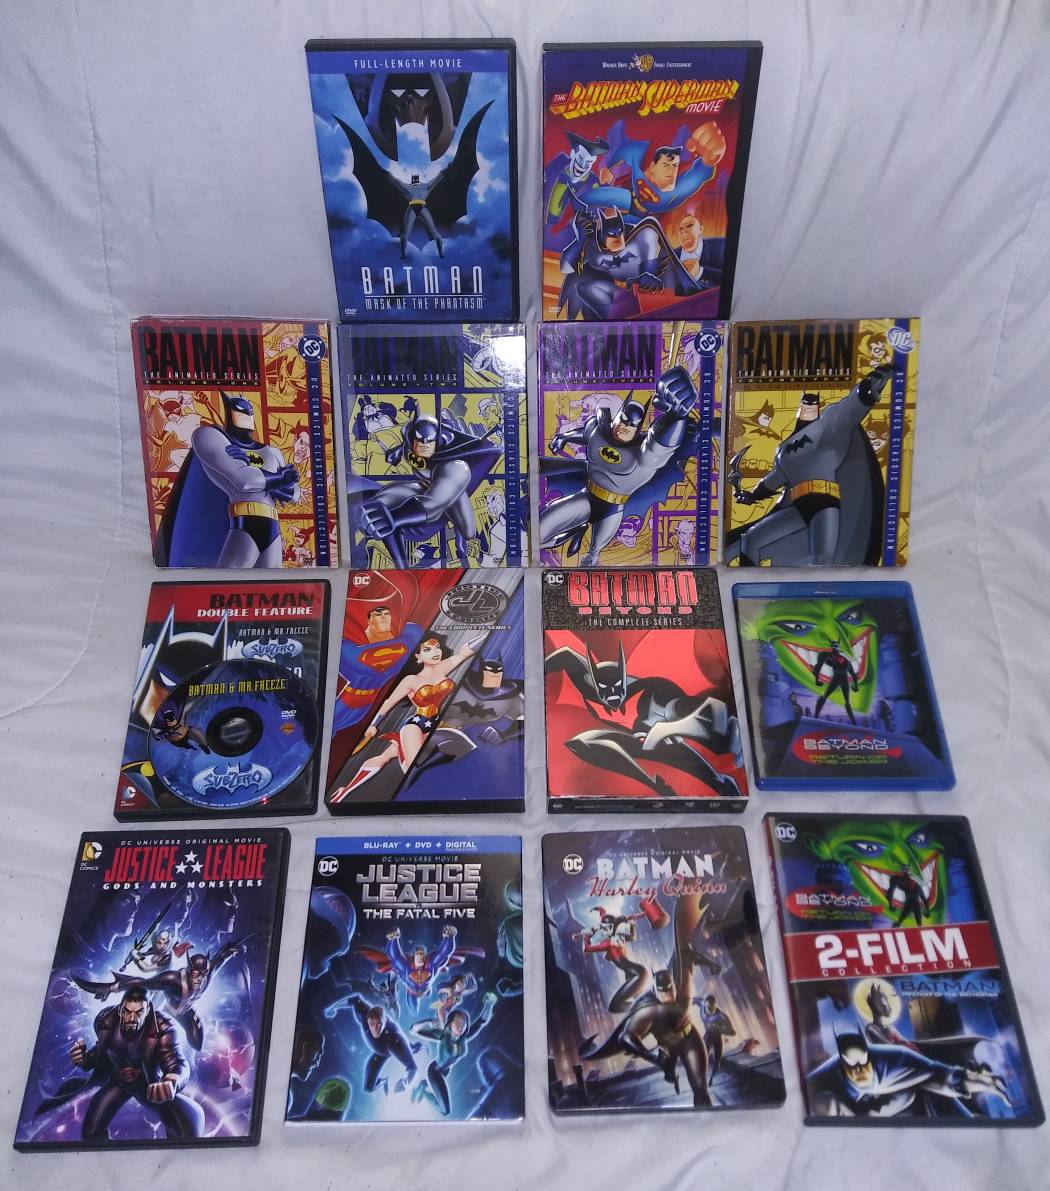 My DC Animated Universe DVD Collection by Batboy101 on DeviantArt